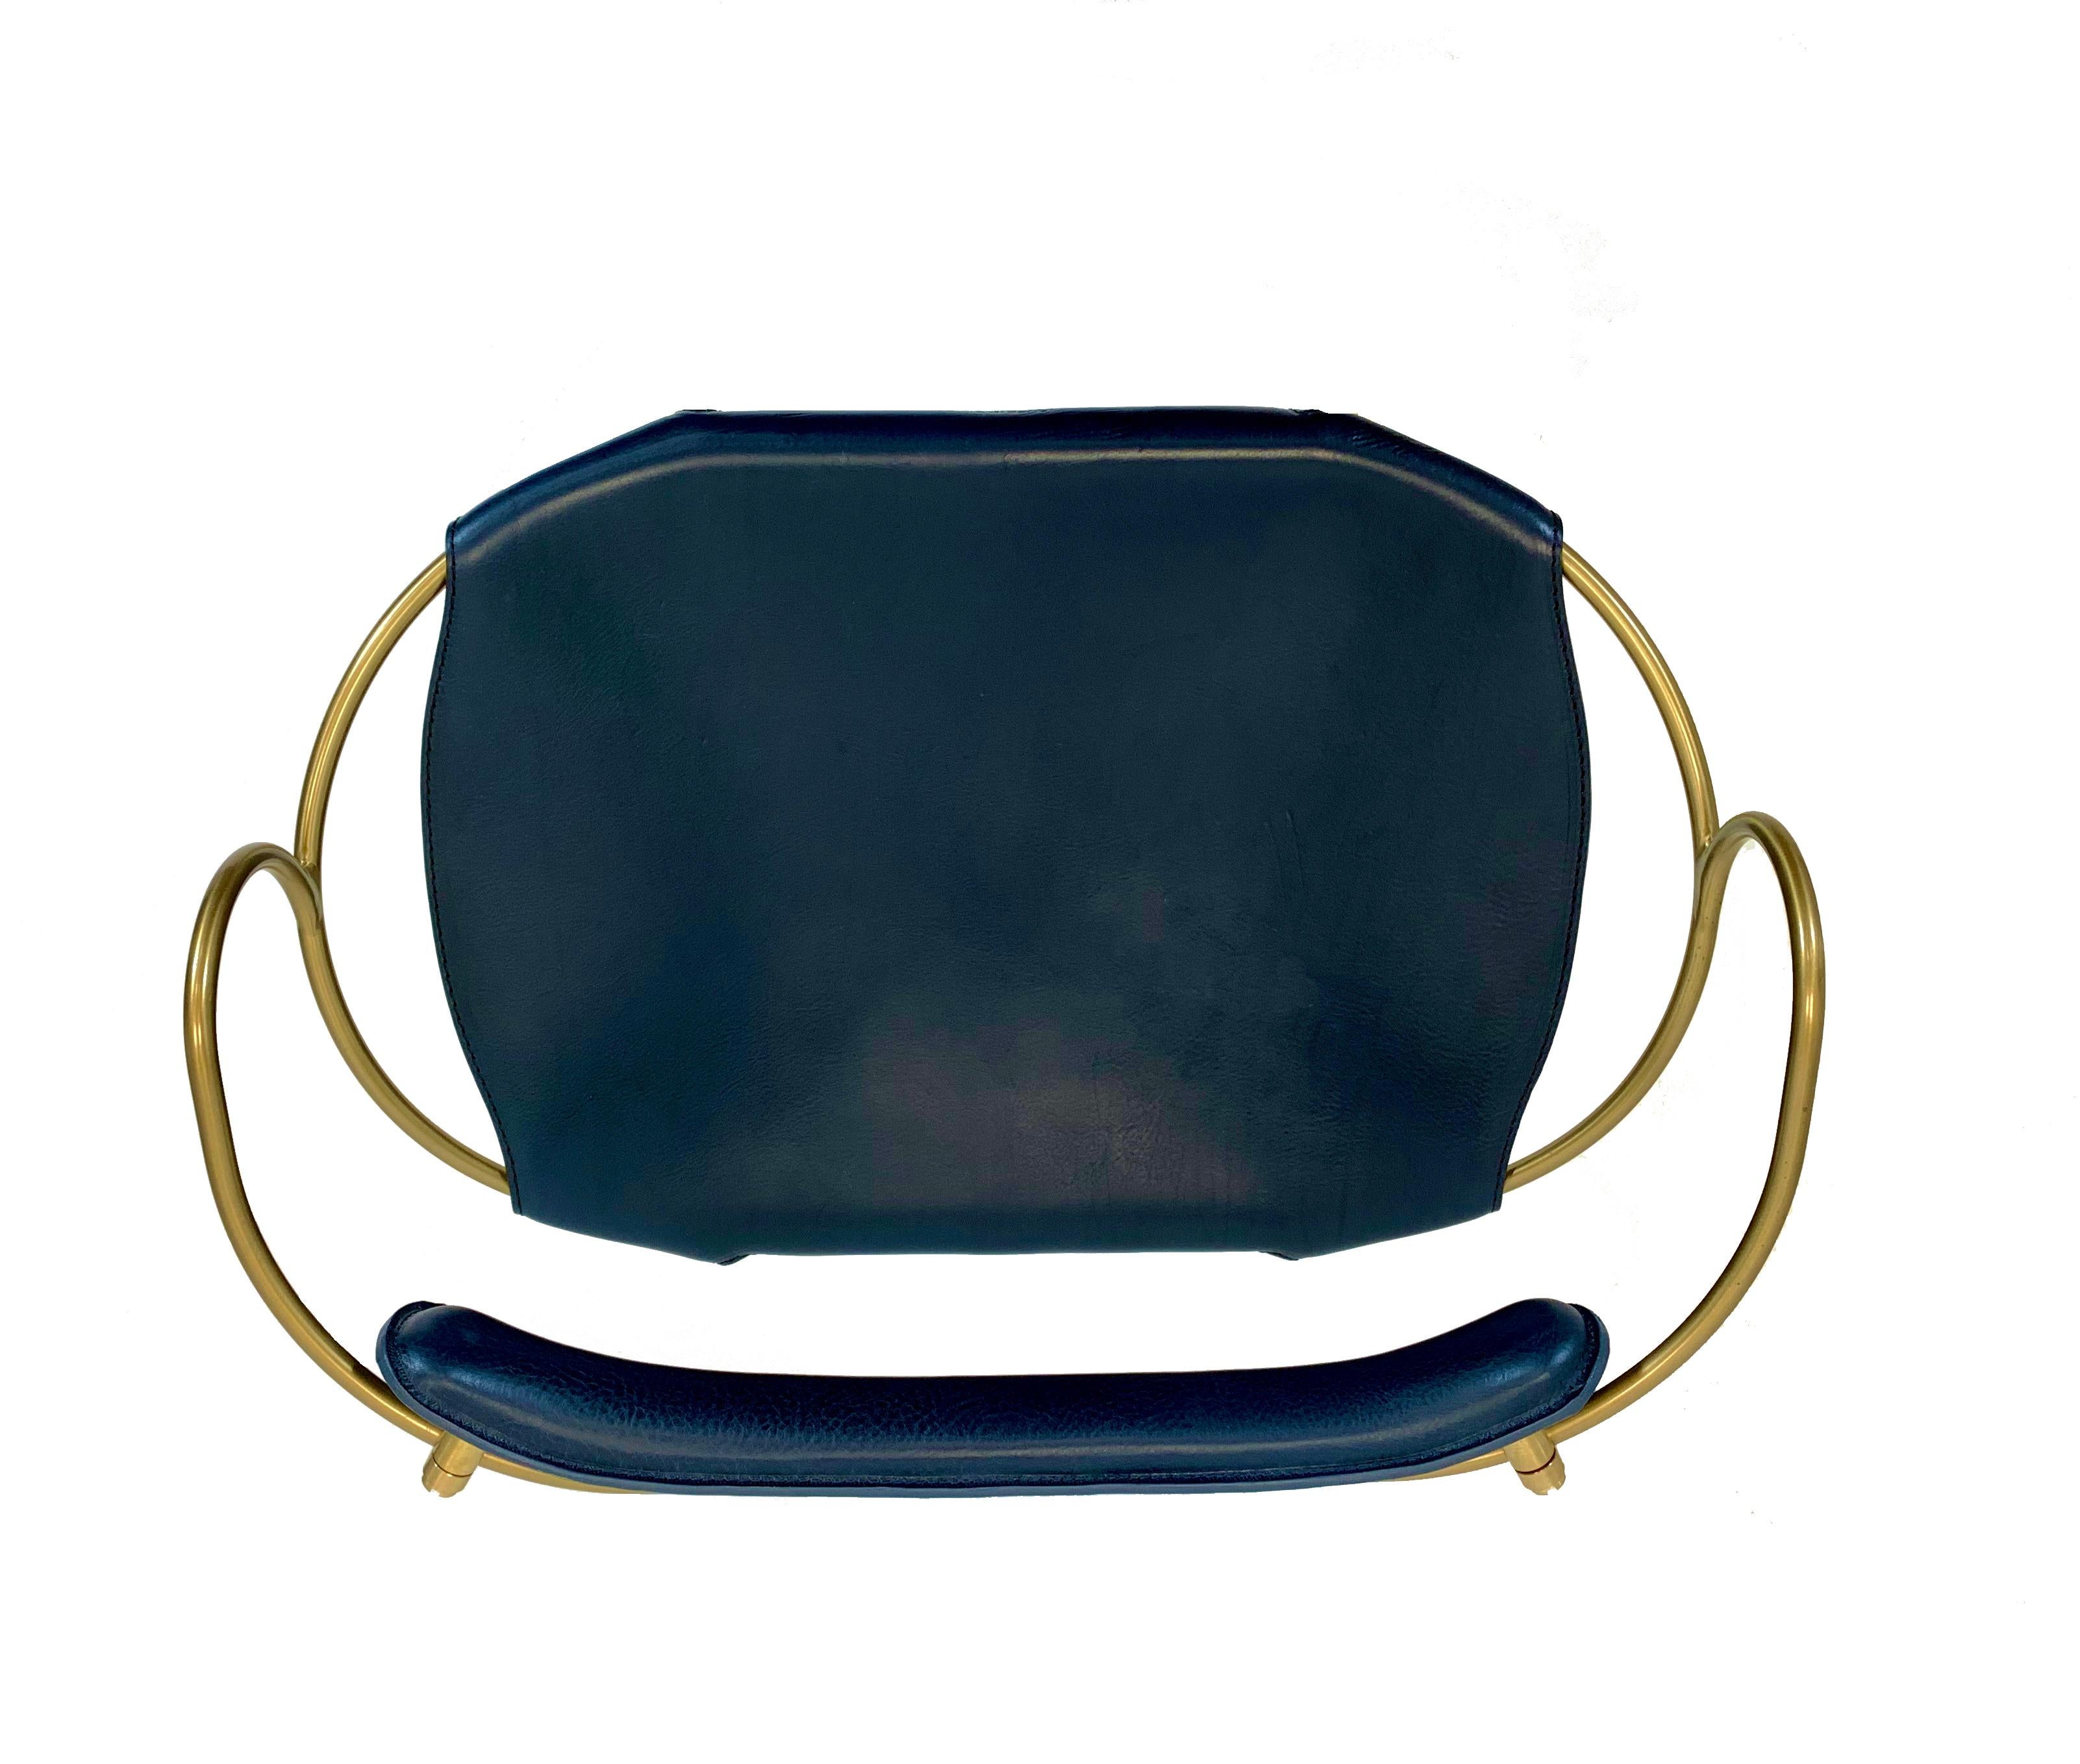 Spanish Sculptural Contemporary Barstool w Backrest Aged Brass Steel & Navy Blue Leather For Sale